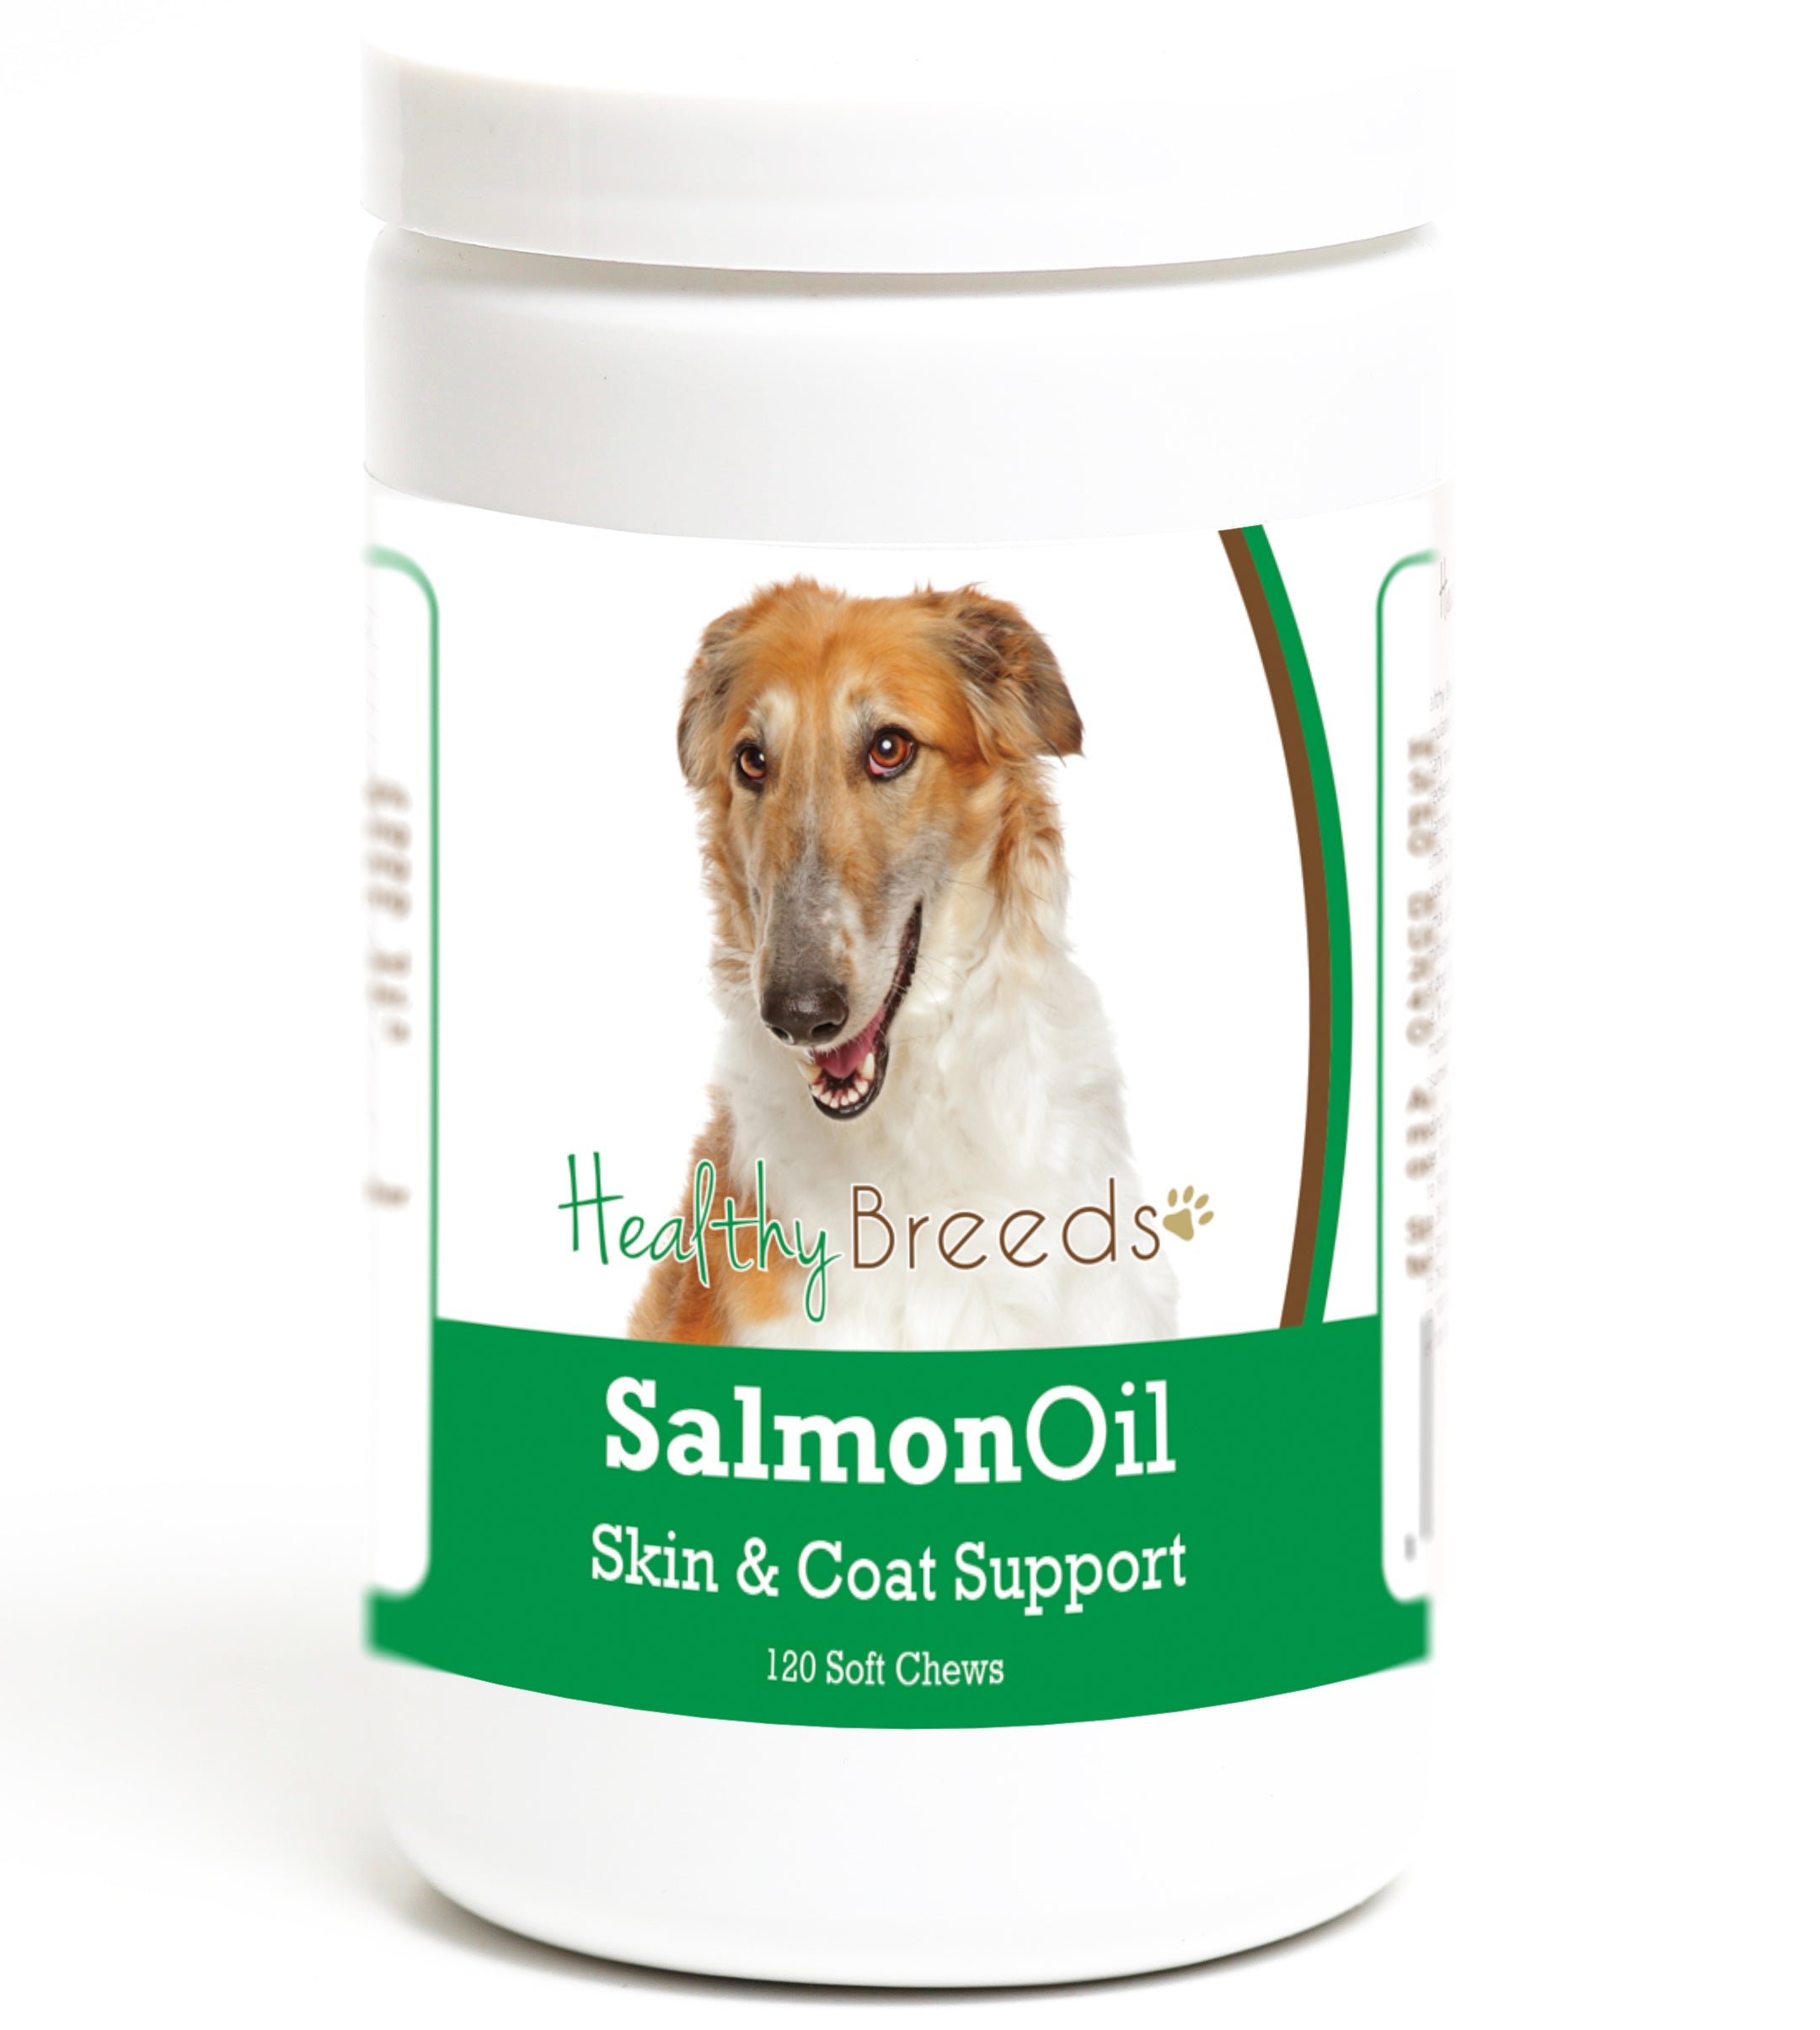 Bearded Collie Salmon Oil Soft Chews 120 Count